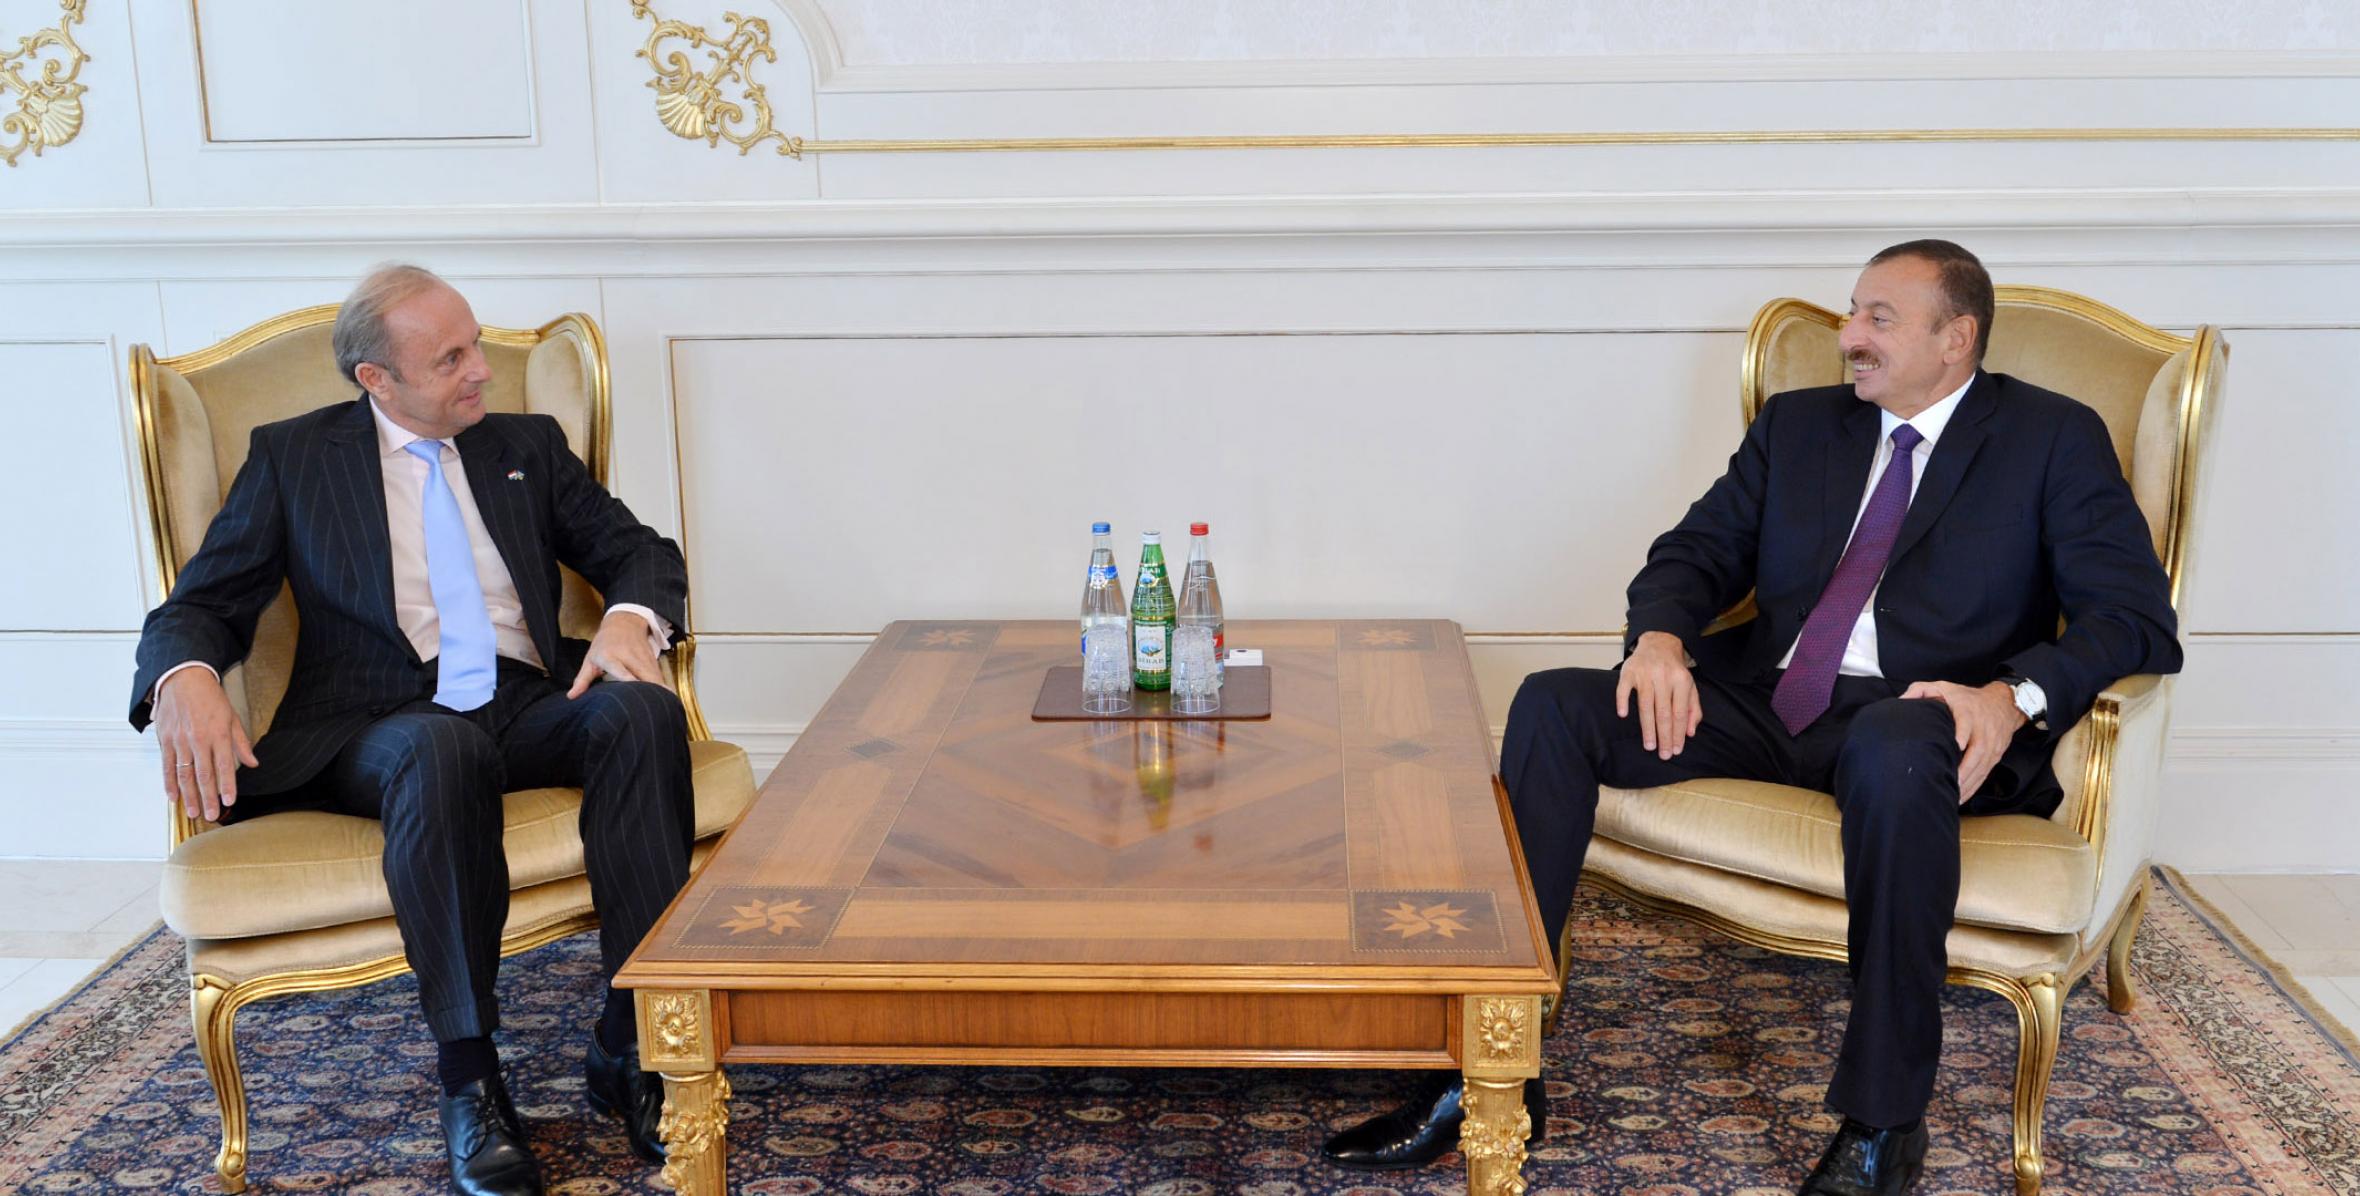 Ilham Aliyev accepted the credentials of the Ambassador of the Netherlands to Azerbaijan